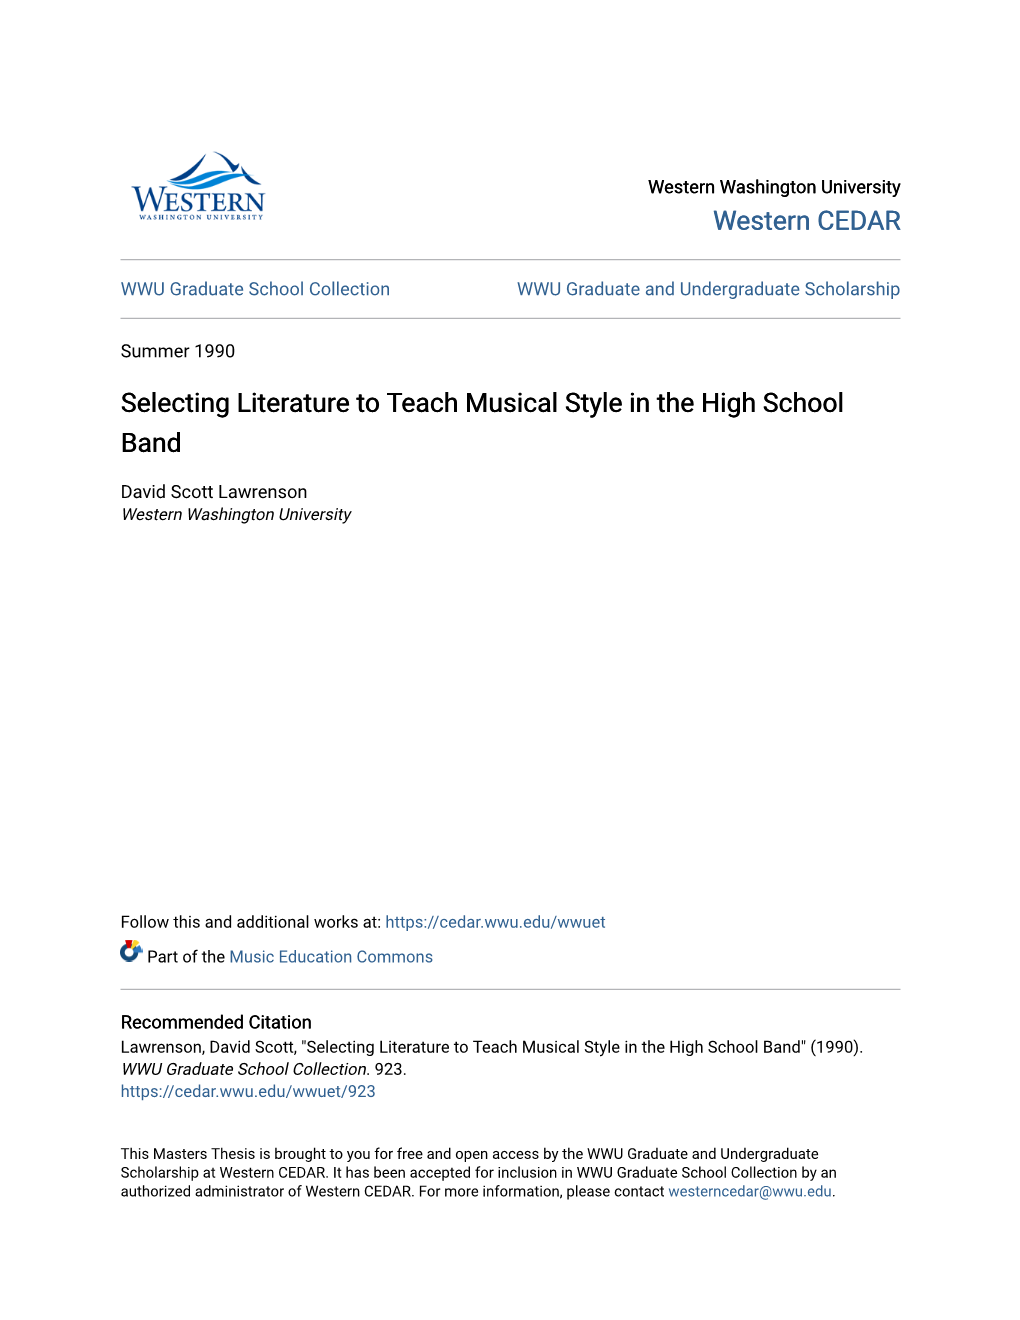 Selecting Literature to Teach Musical Style in the High School Band